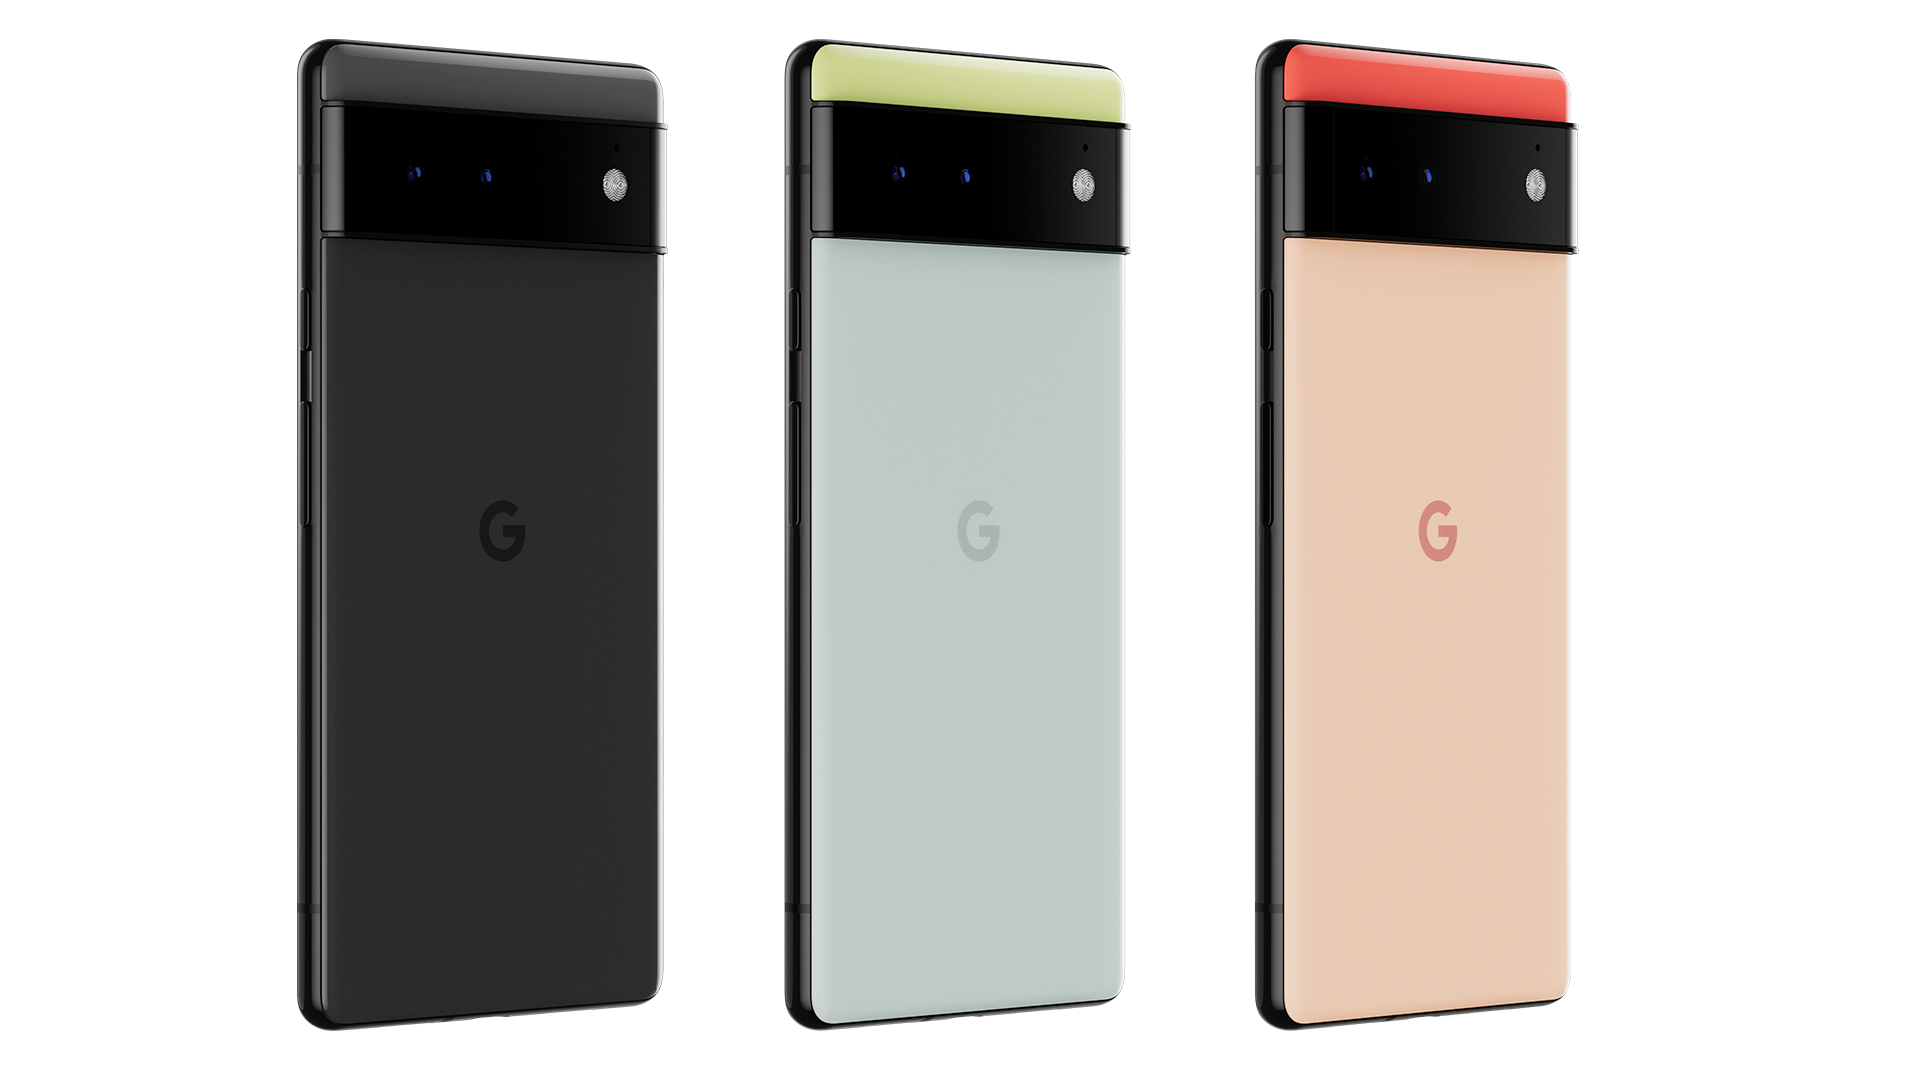 The Google Pixel 6 in all its colorways.